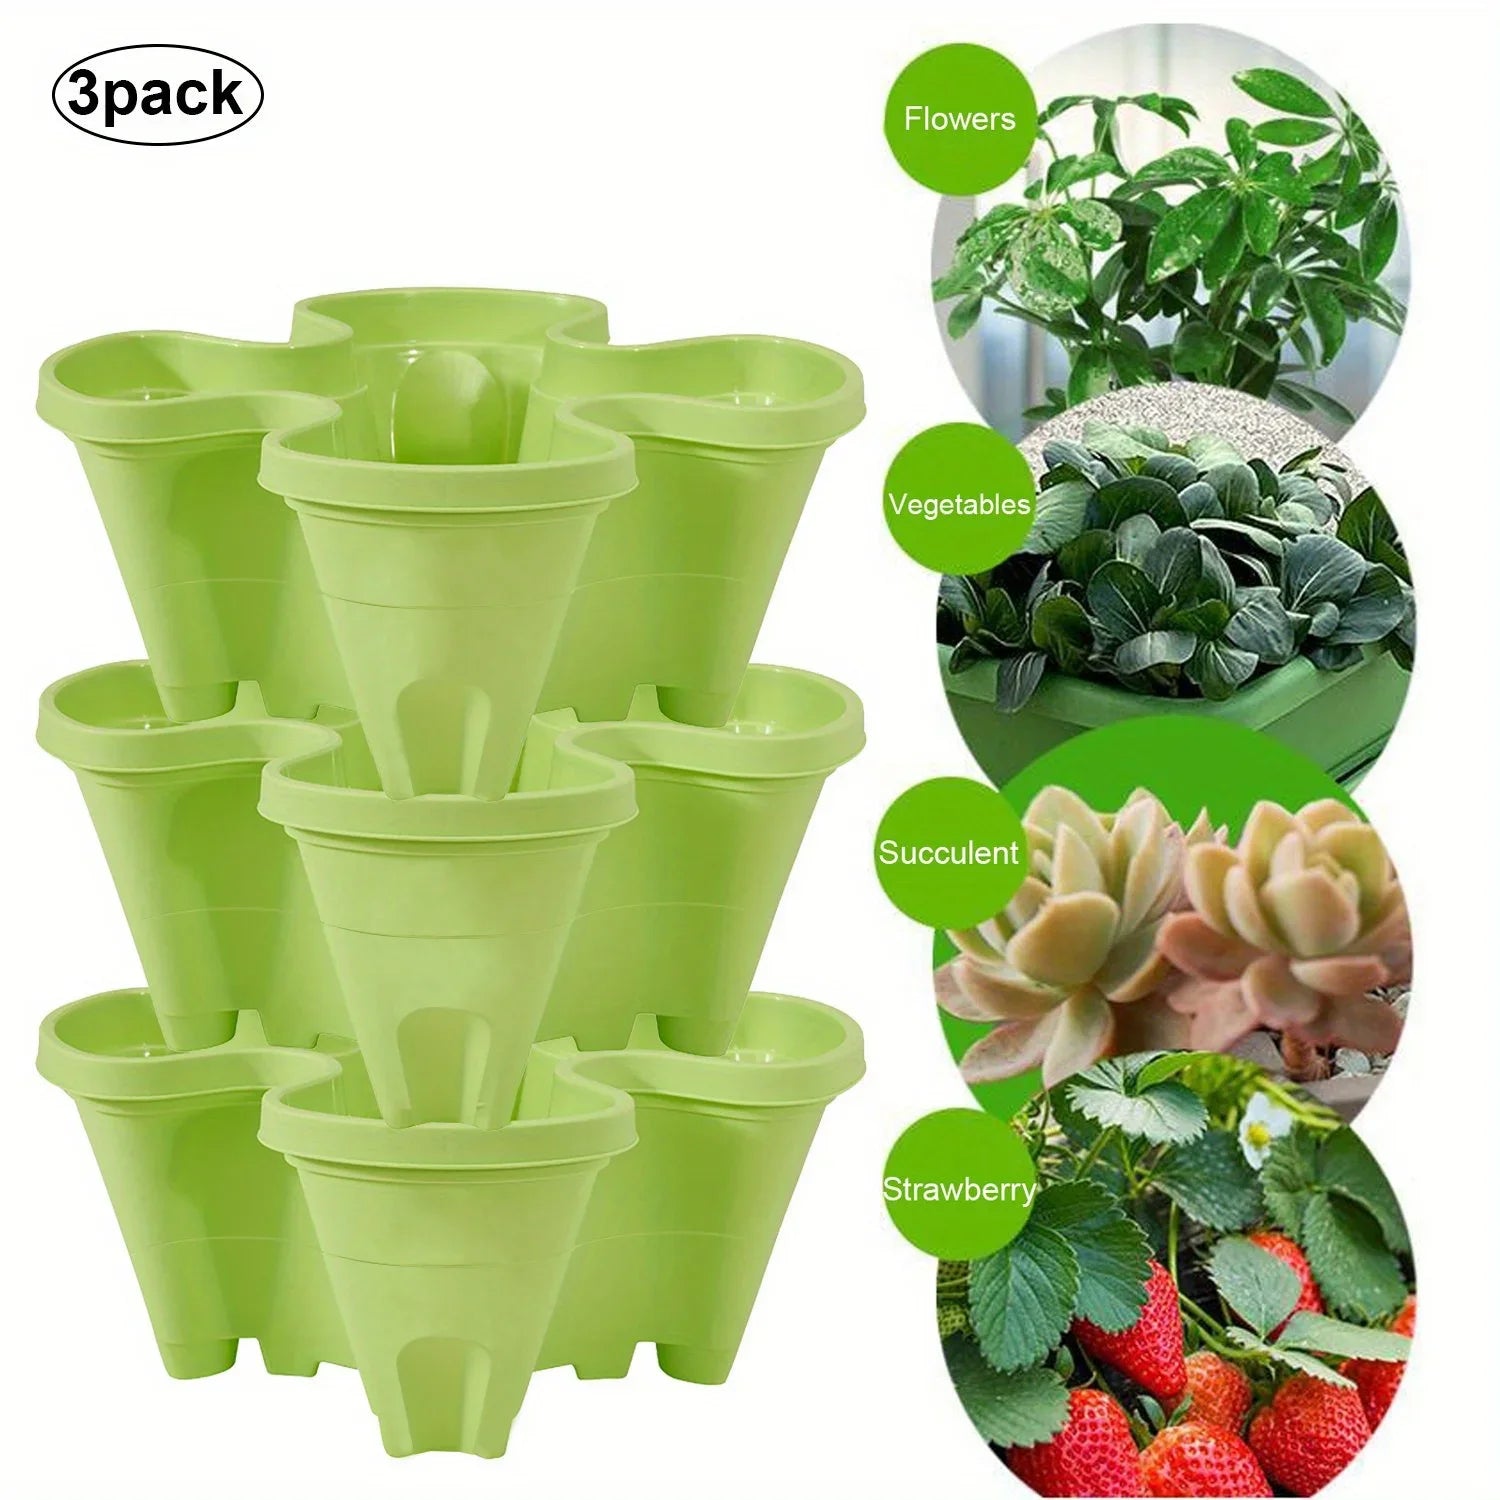 Vertical Planter Tower Garden, 3 Tiered Planter Stackable Herb Garden Planter with Movable Casters and Bottom Indoor and Outdoor